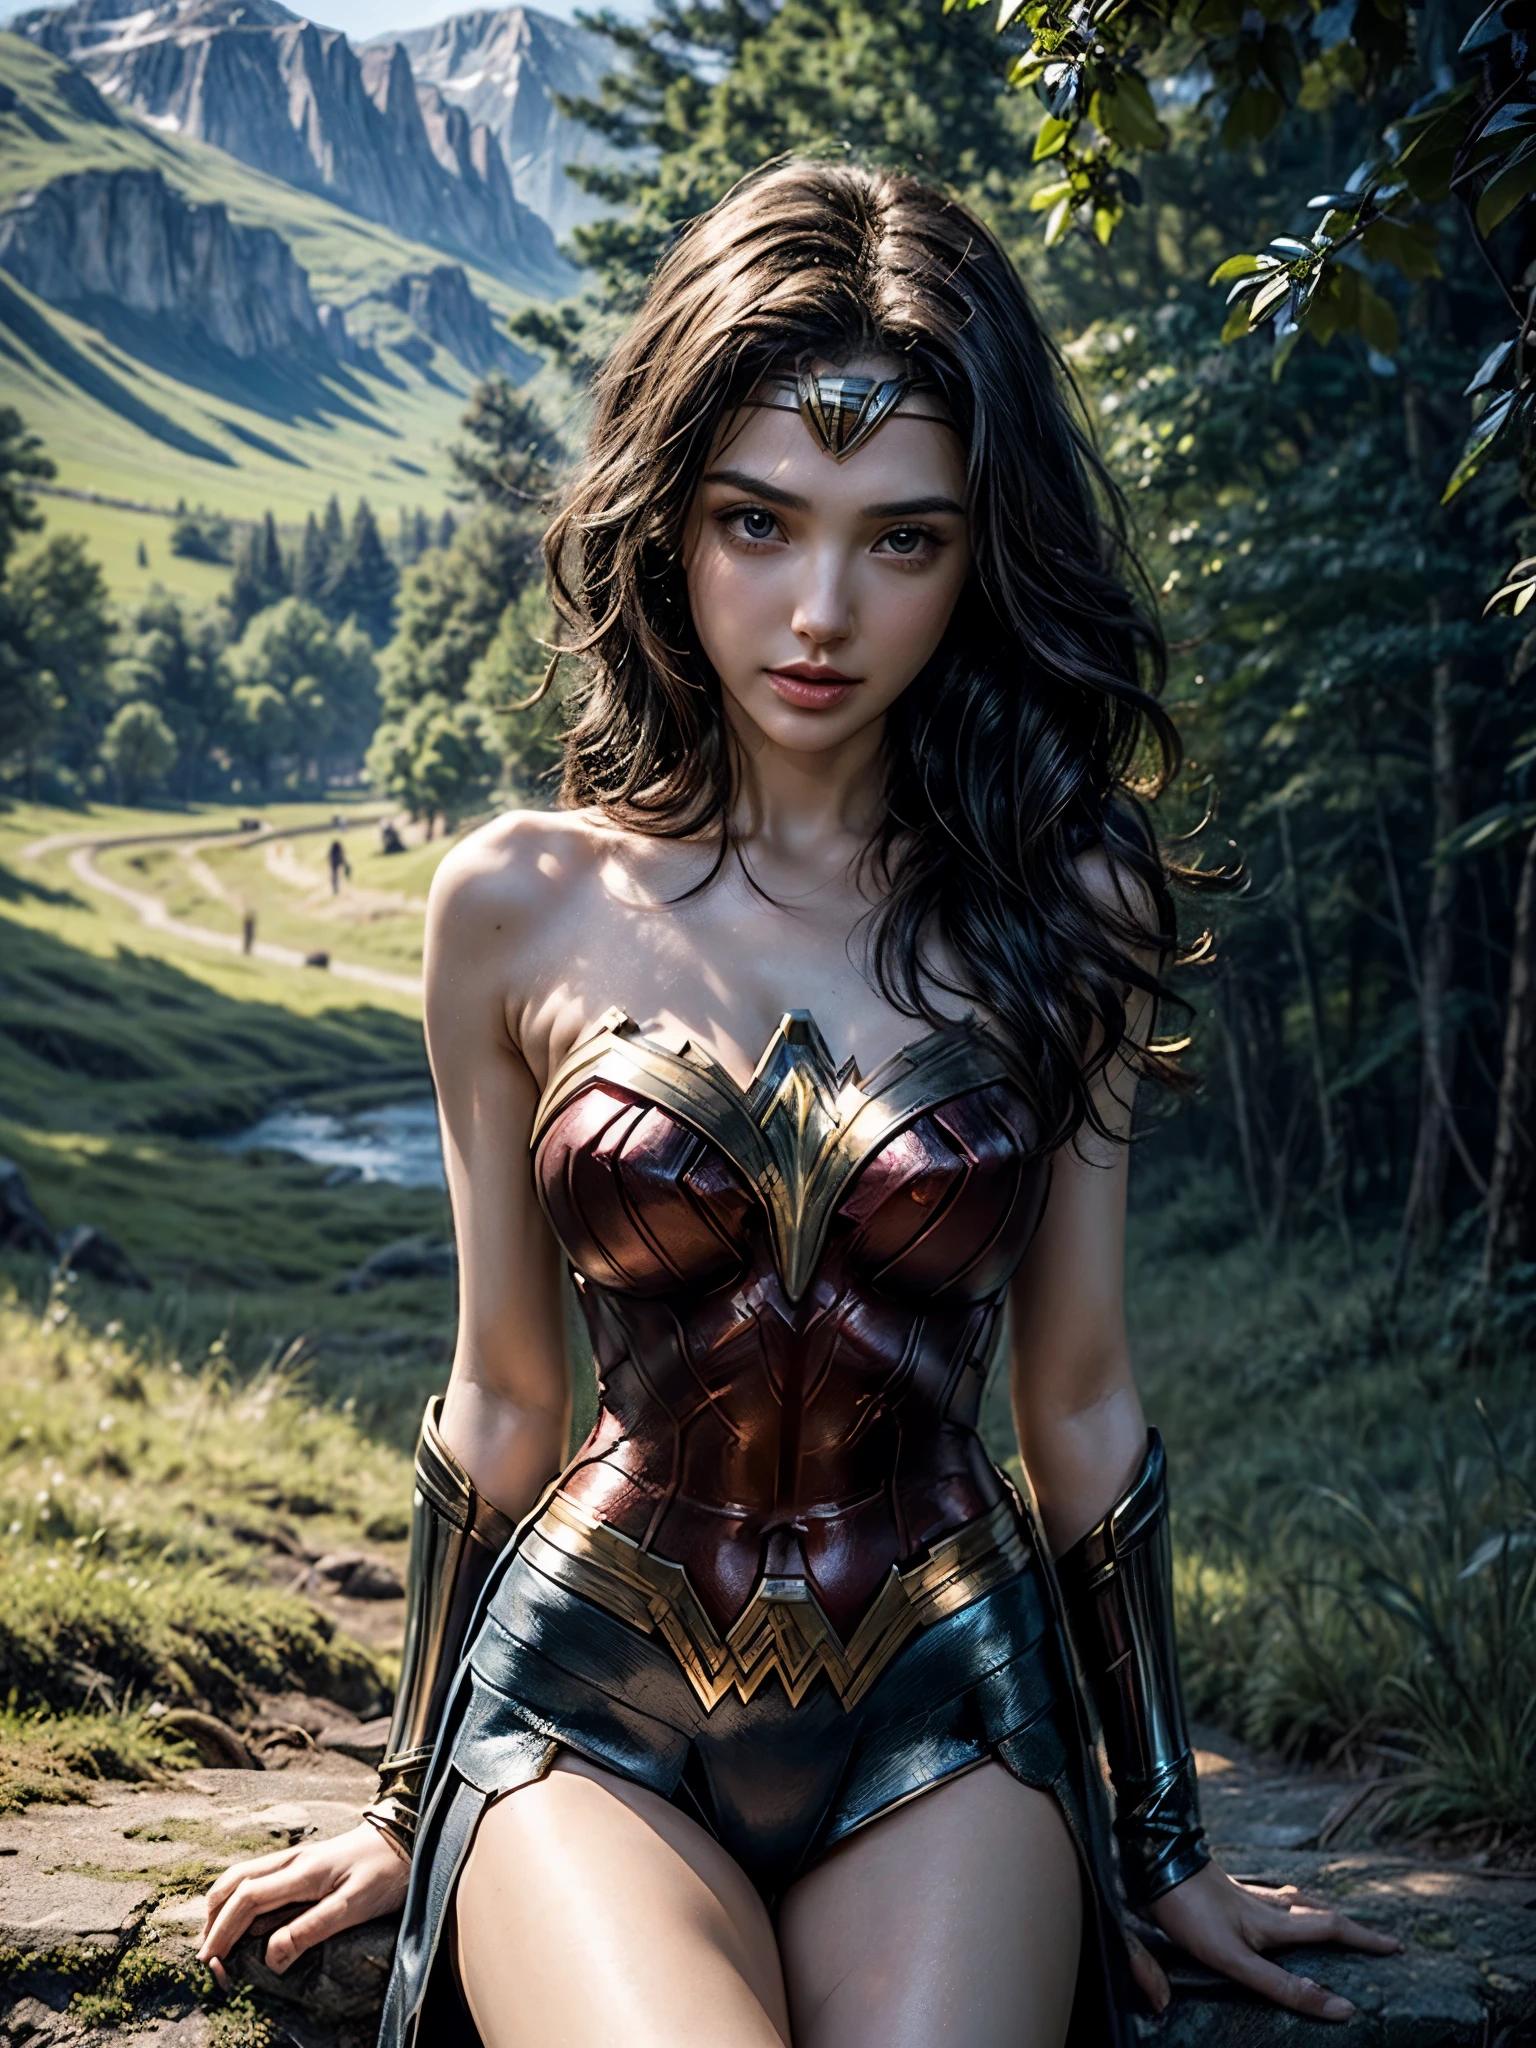 Gal Gadot, She breast size is M cup, full body, she very sexy, she have perfect body, she so beautifully,She have good eyes,She is full of charm, her poses are beautiful, close up,(((Woder Woman outfit))), Wonder Woman 
from DC Comics,8k,correct face,beautiful face,A beautiful sight,sparkling eyes,((Half body photograph)), ((close up)) (portrait)) bust,In the middle of nature,The sun shines,green field,mountain,forest,stream